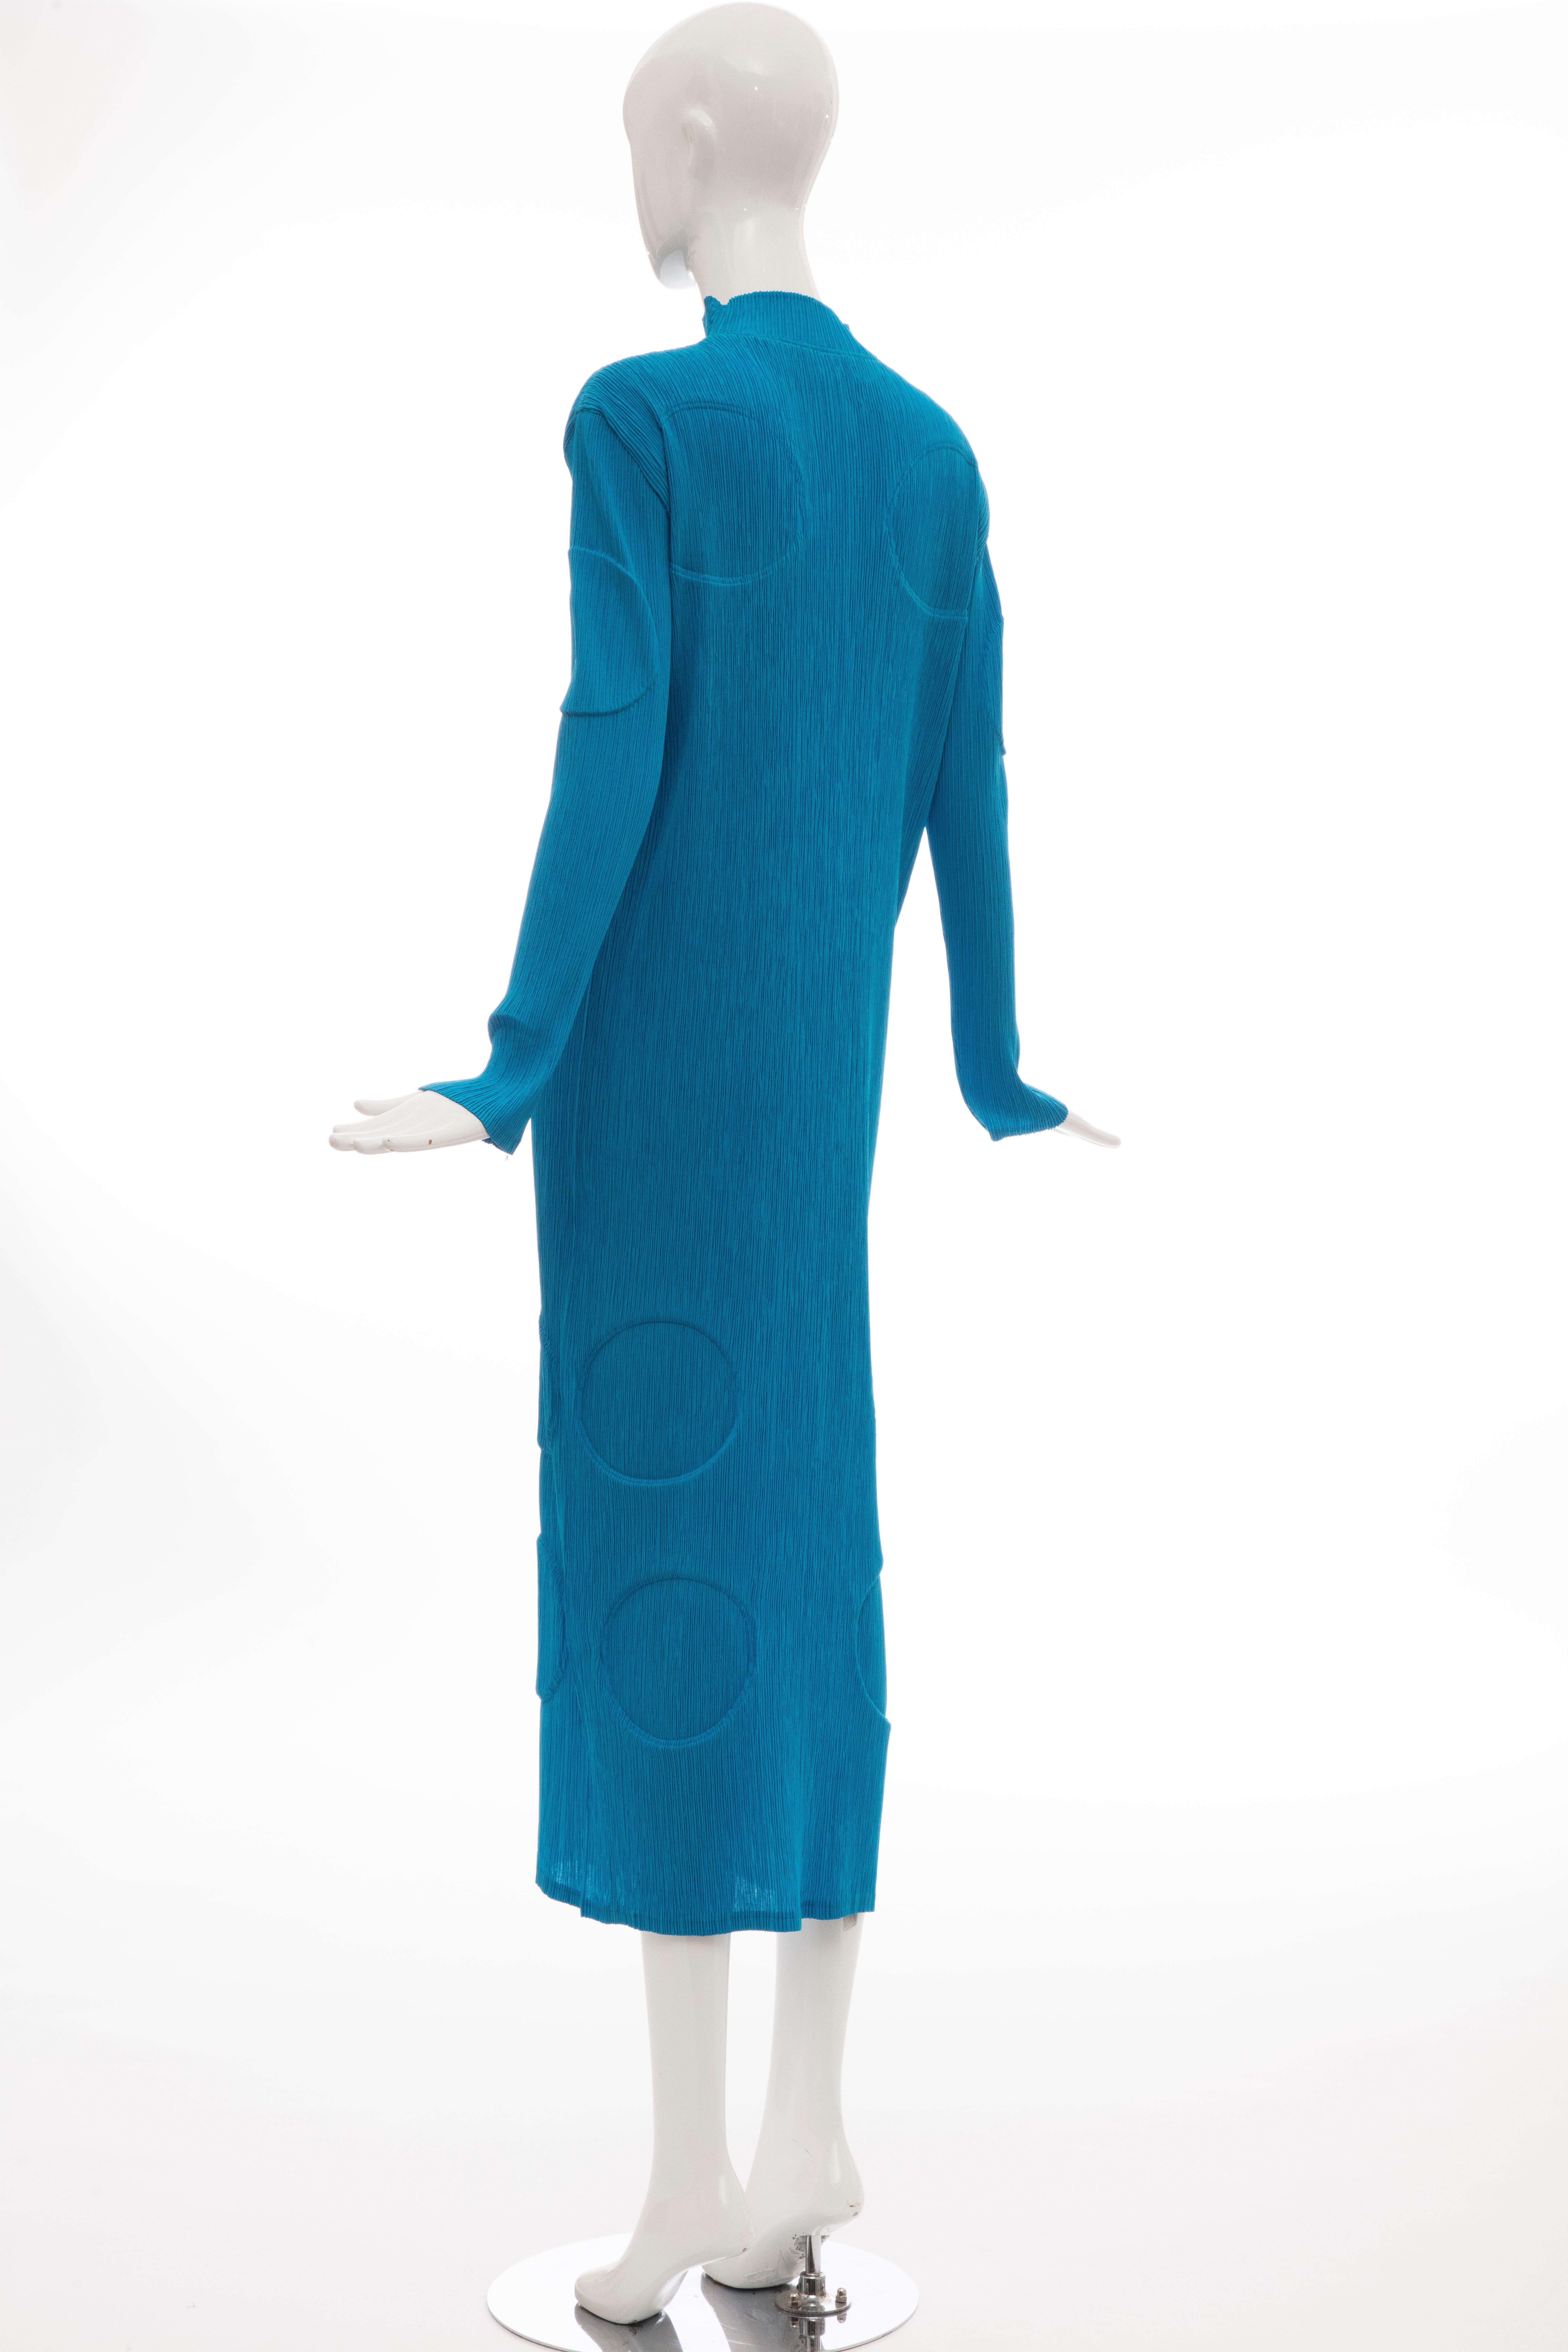 Issey Miyake Turquoise Long Button Front Cardigan, Circa 1990s For Sale 5